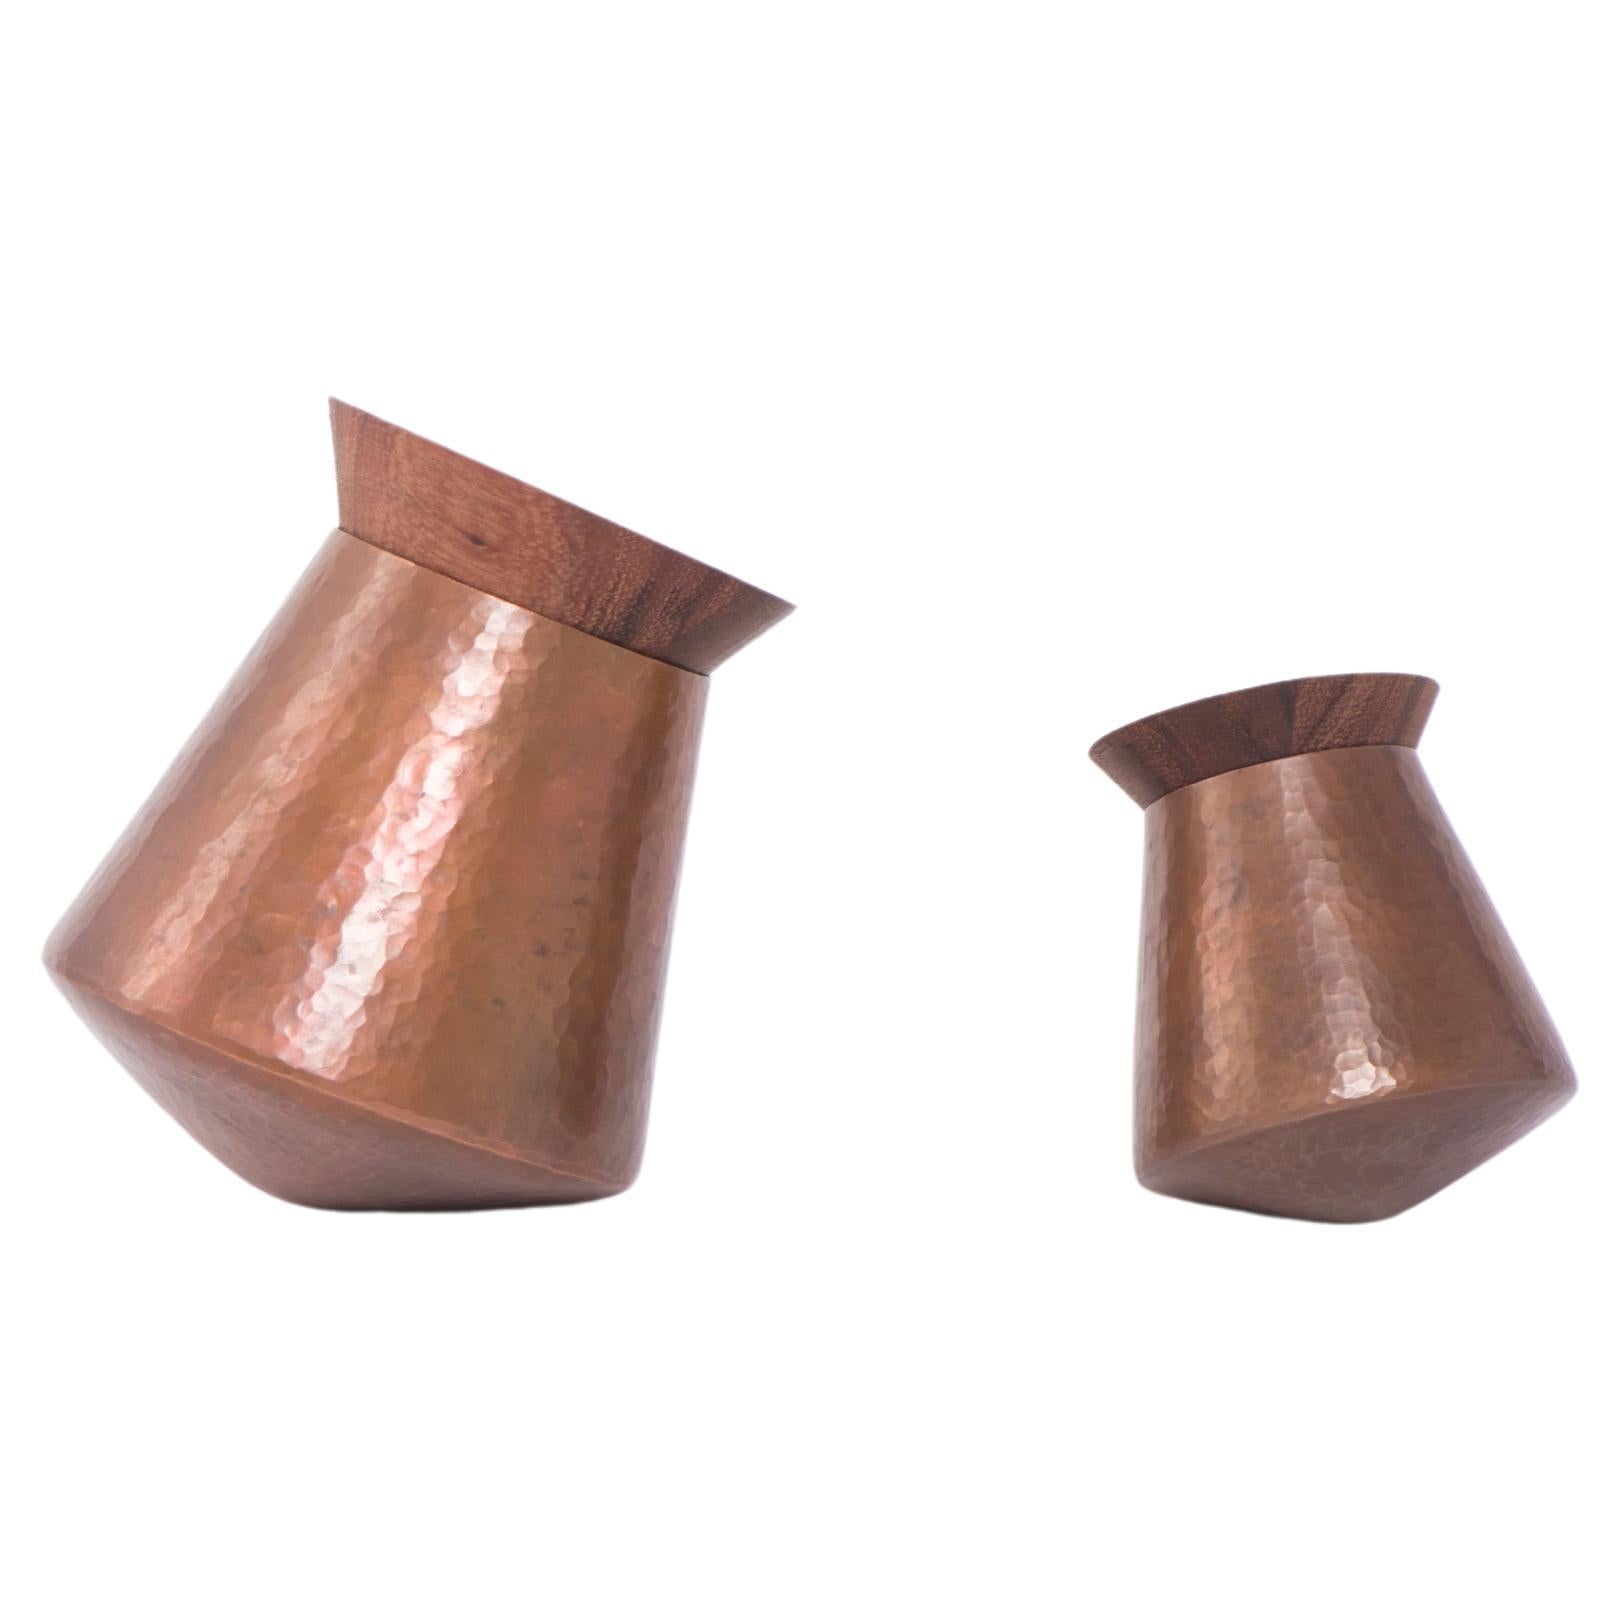 Set of Hammered Copper Containers with Patinated Finish and Rosamorada Wood Lid For Sale